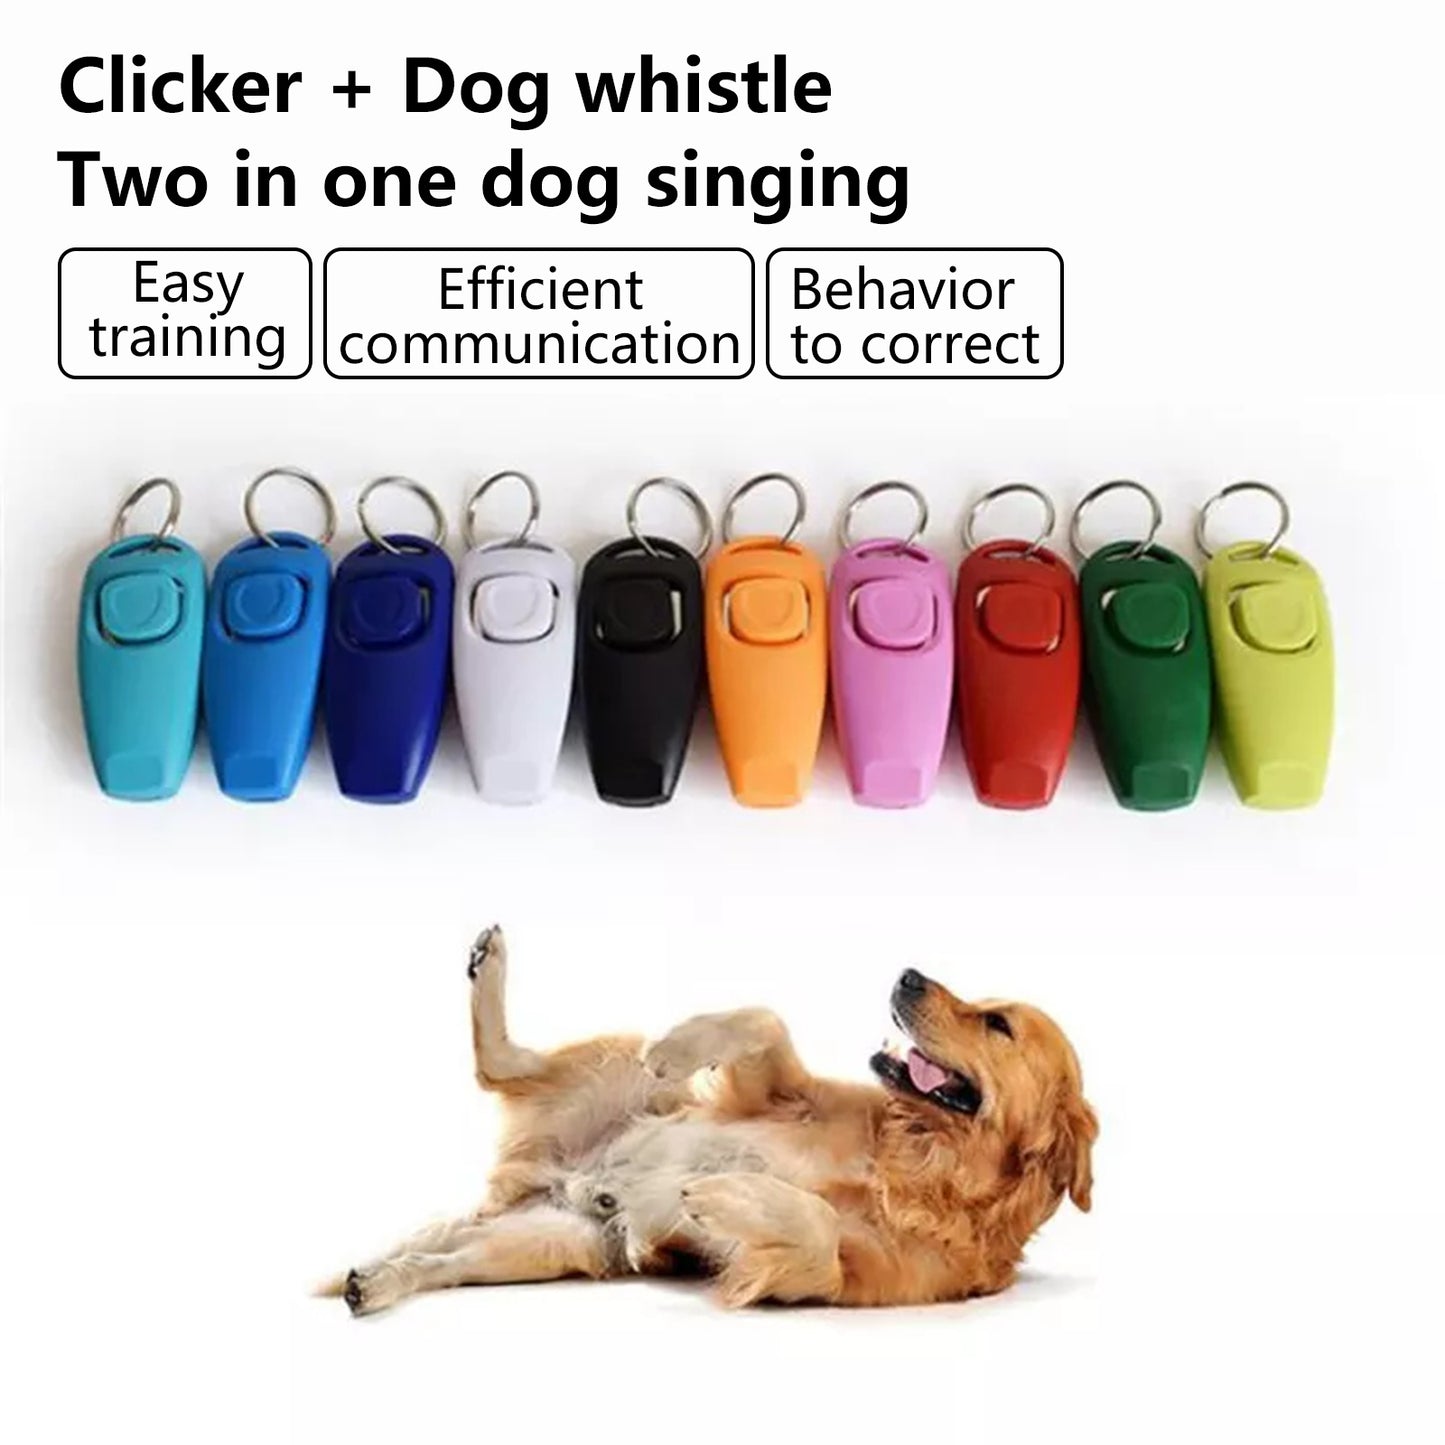 Pawfriends Dog Training Whistle Clicker Combo Stop Pet Barking Obedience Train Skills Black